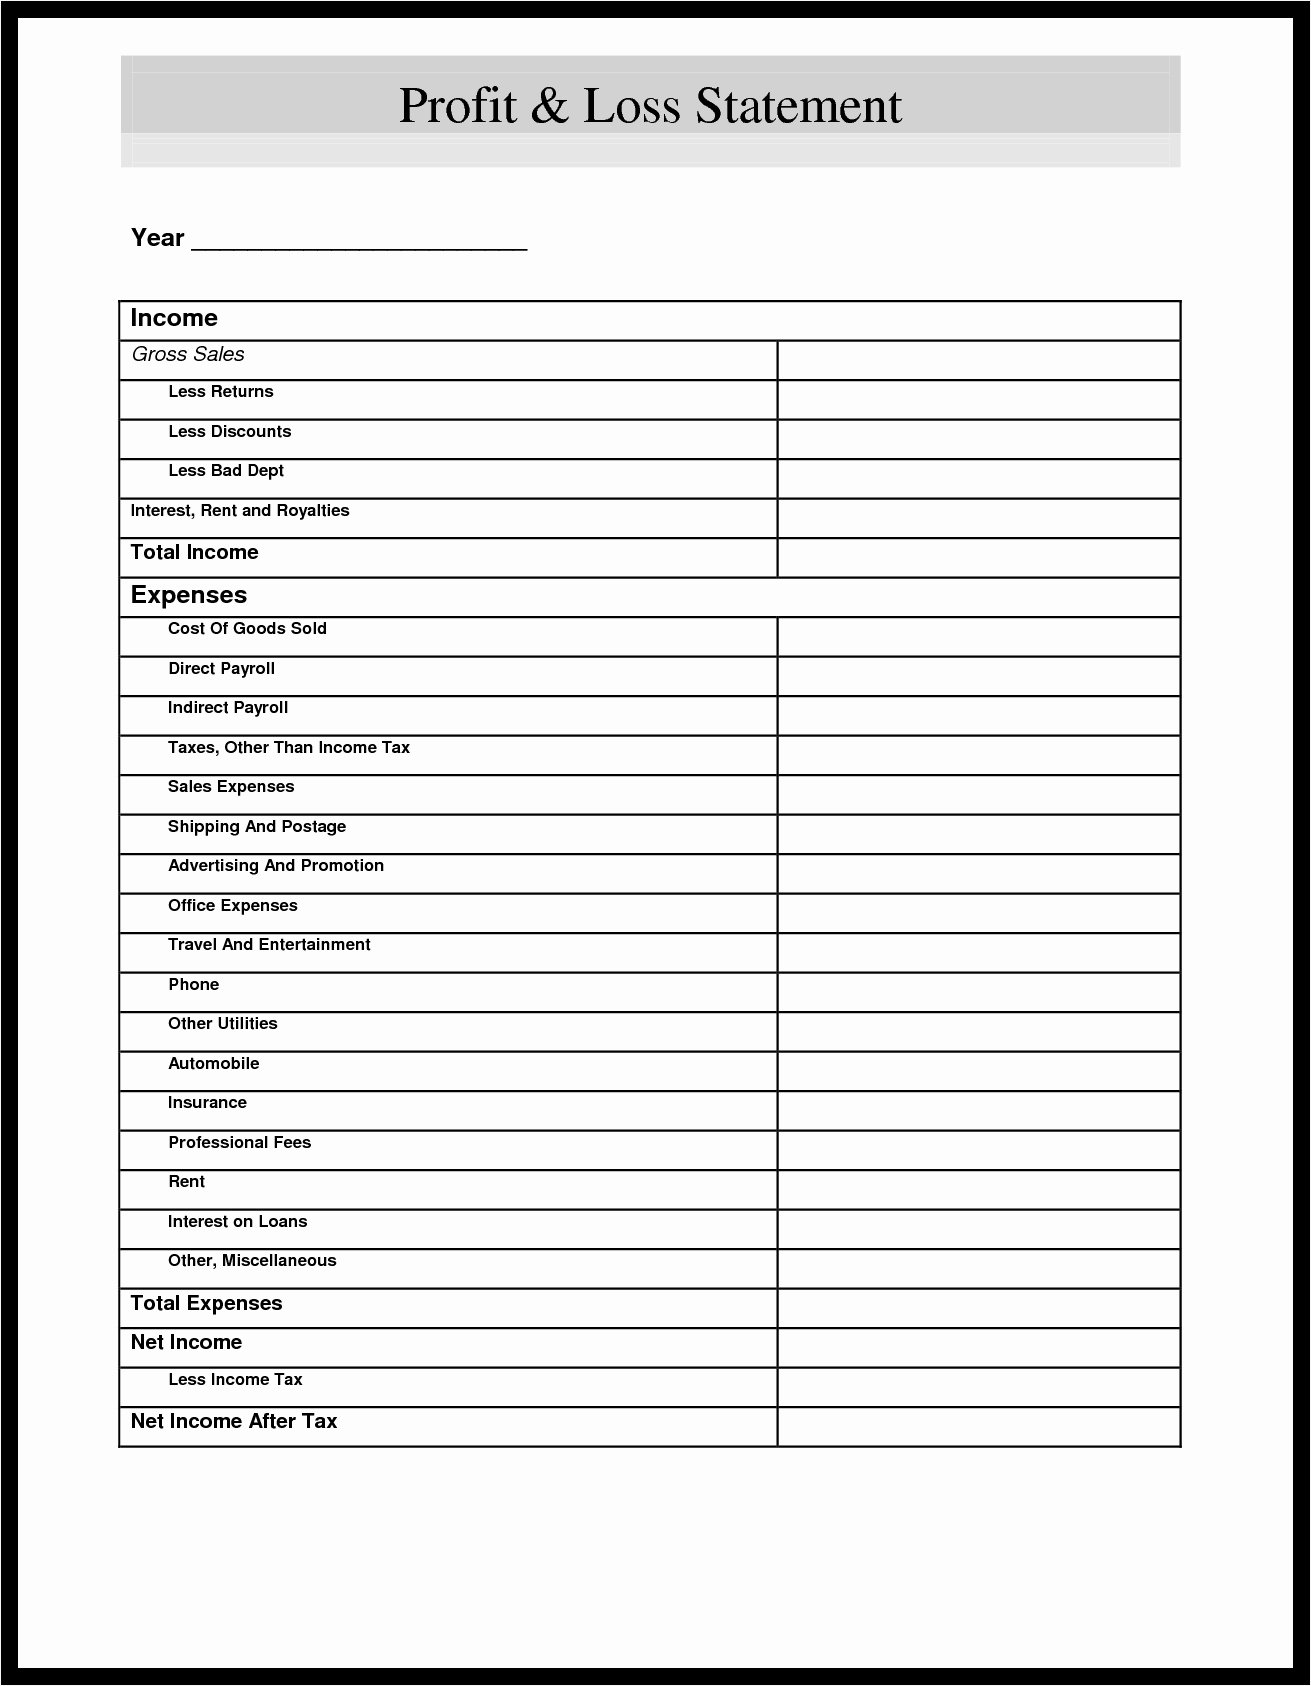 Blank Income Statement Template New Blank In E Statement Mughals